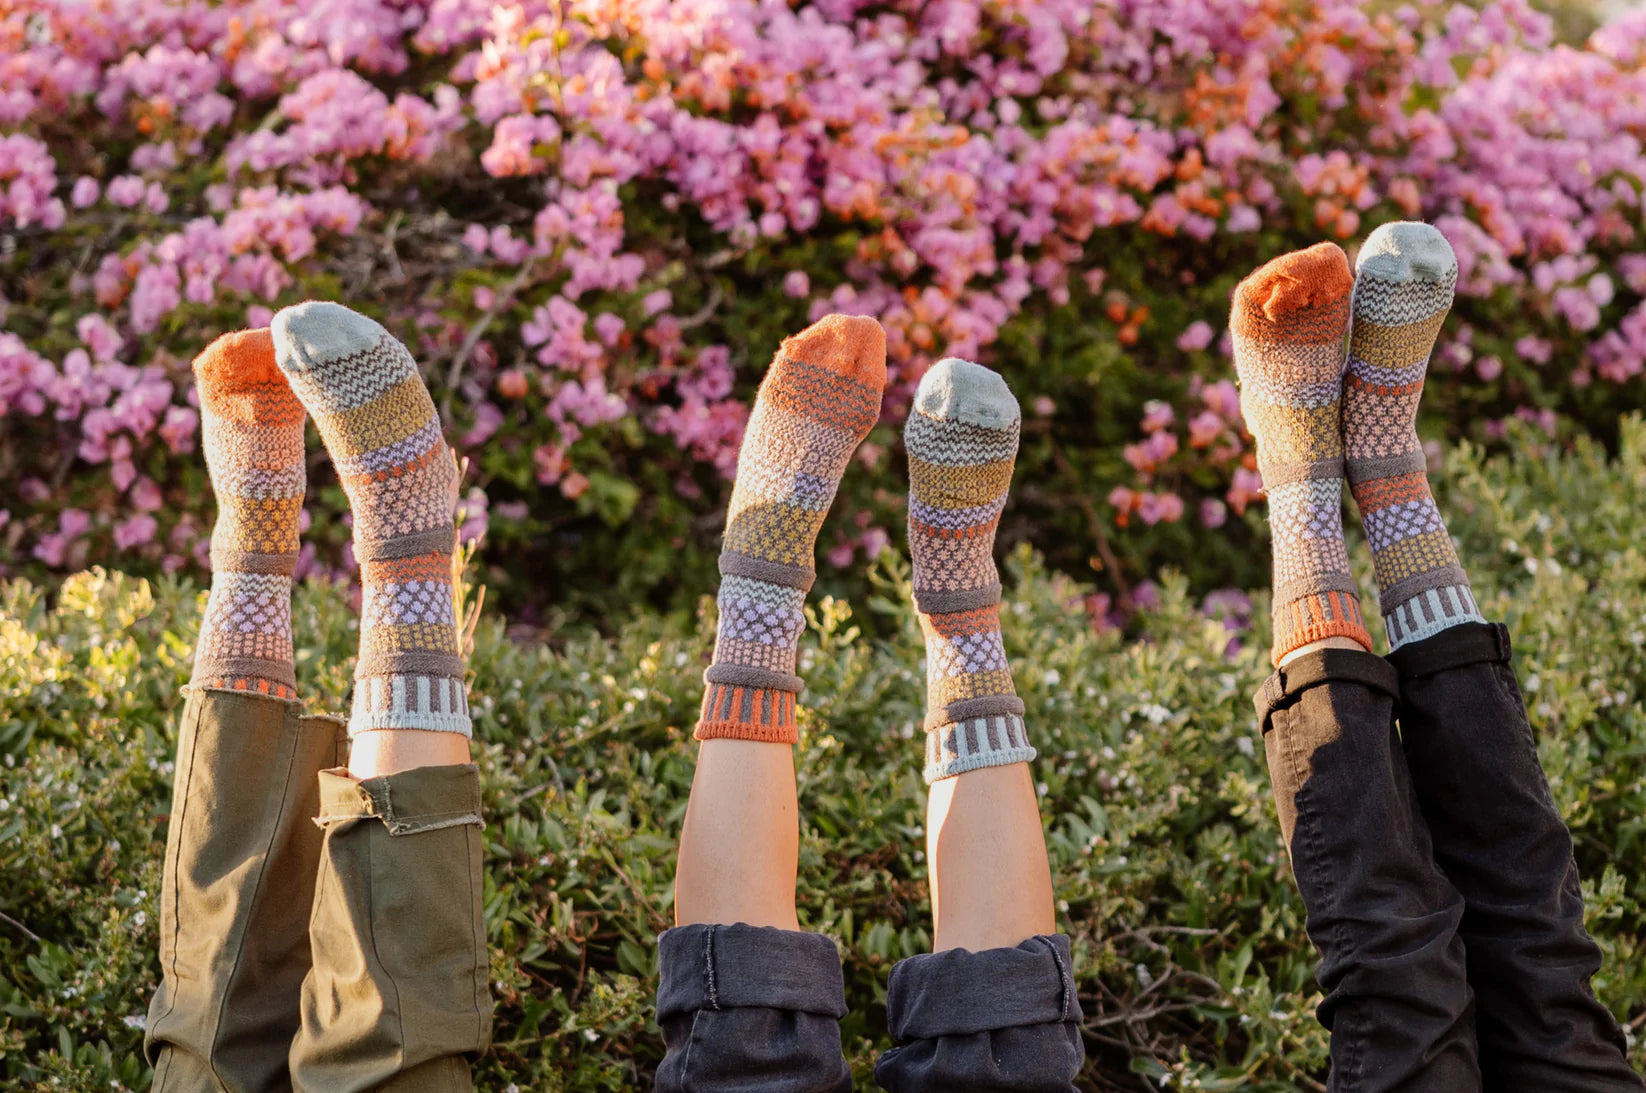 Olive Recycled Cotton Crew Socks -The Sockery